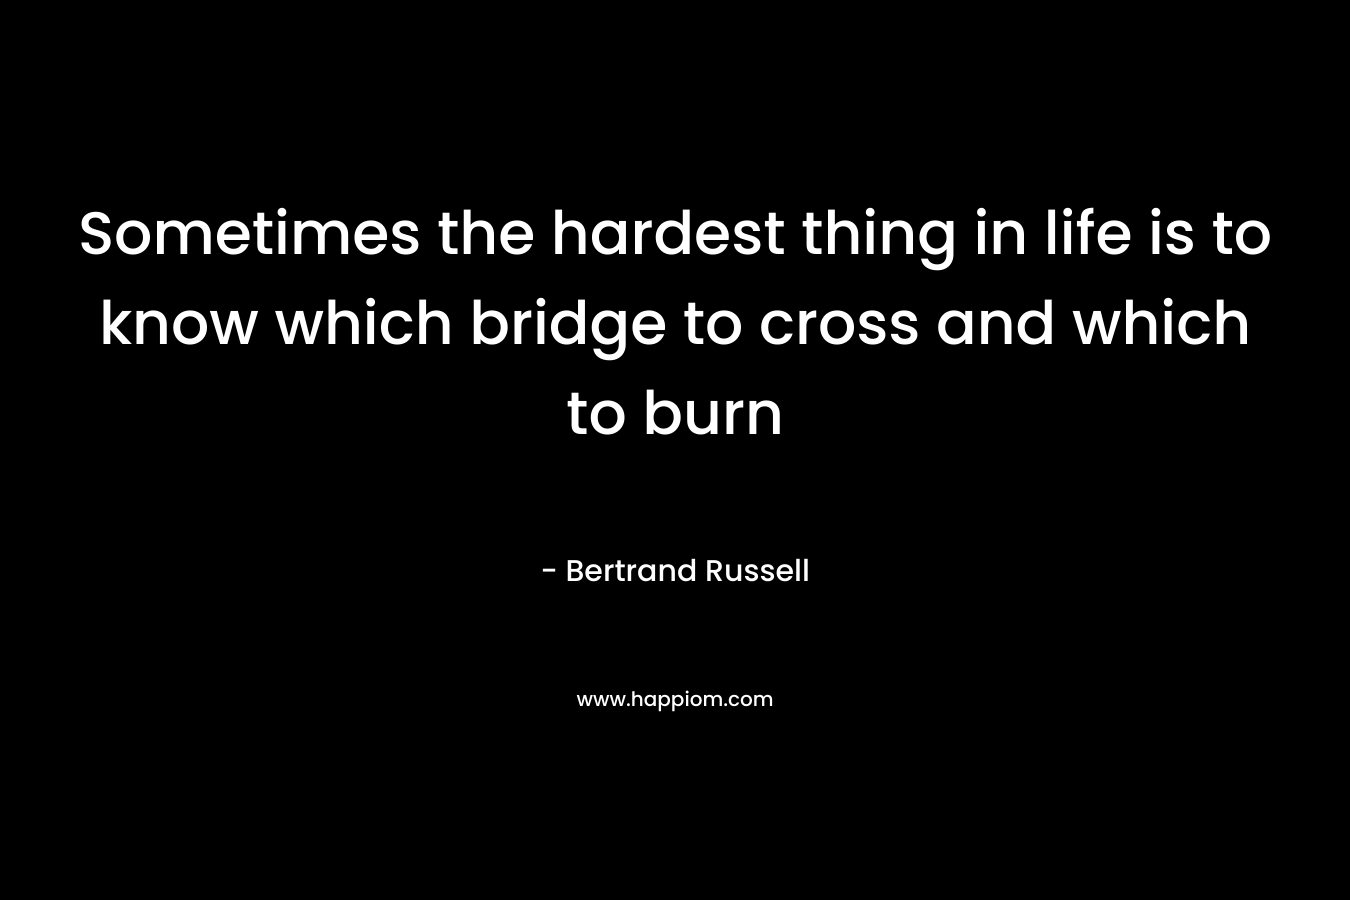 Sometimes the hardest thing in life is to know which bridge to cross and which to burn – Bertrand Russell